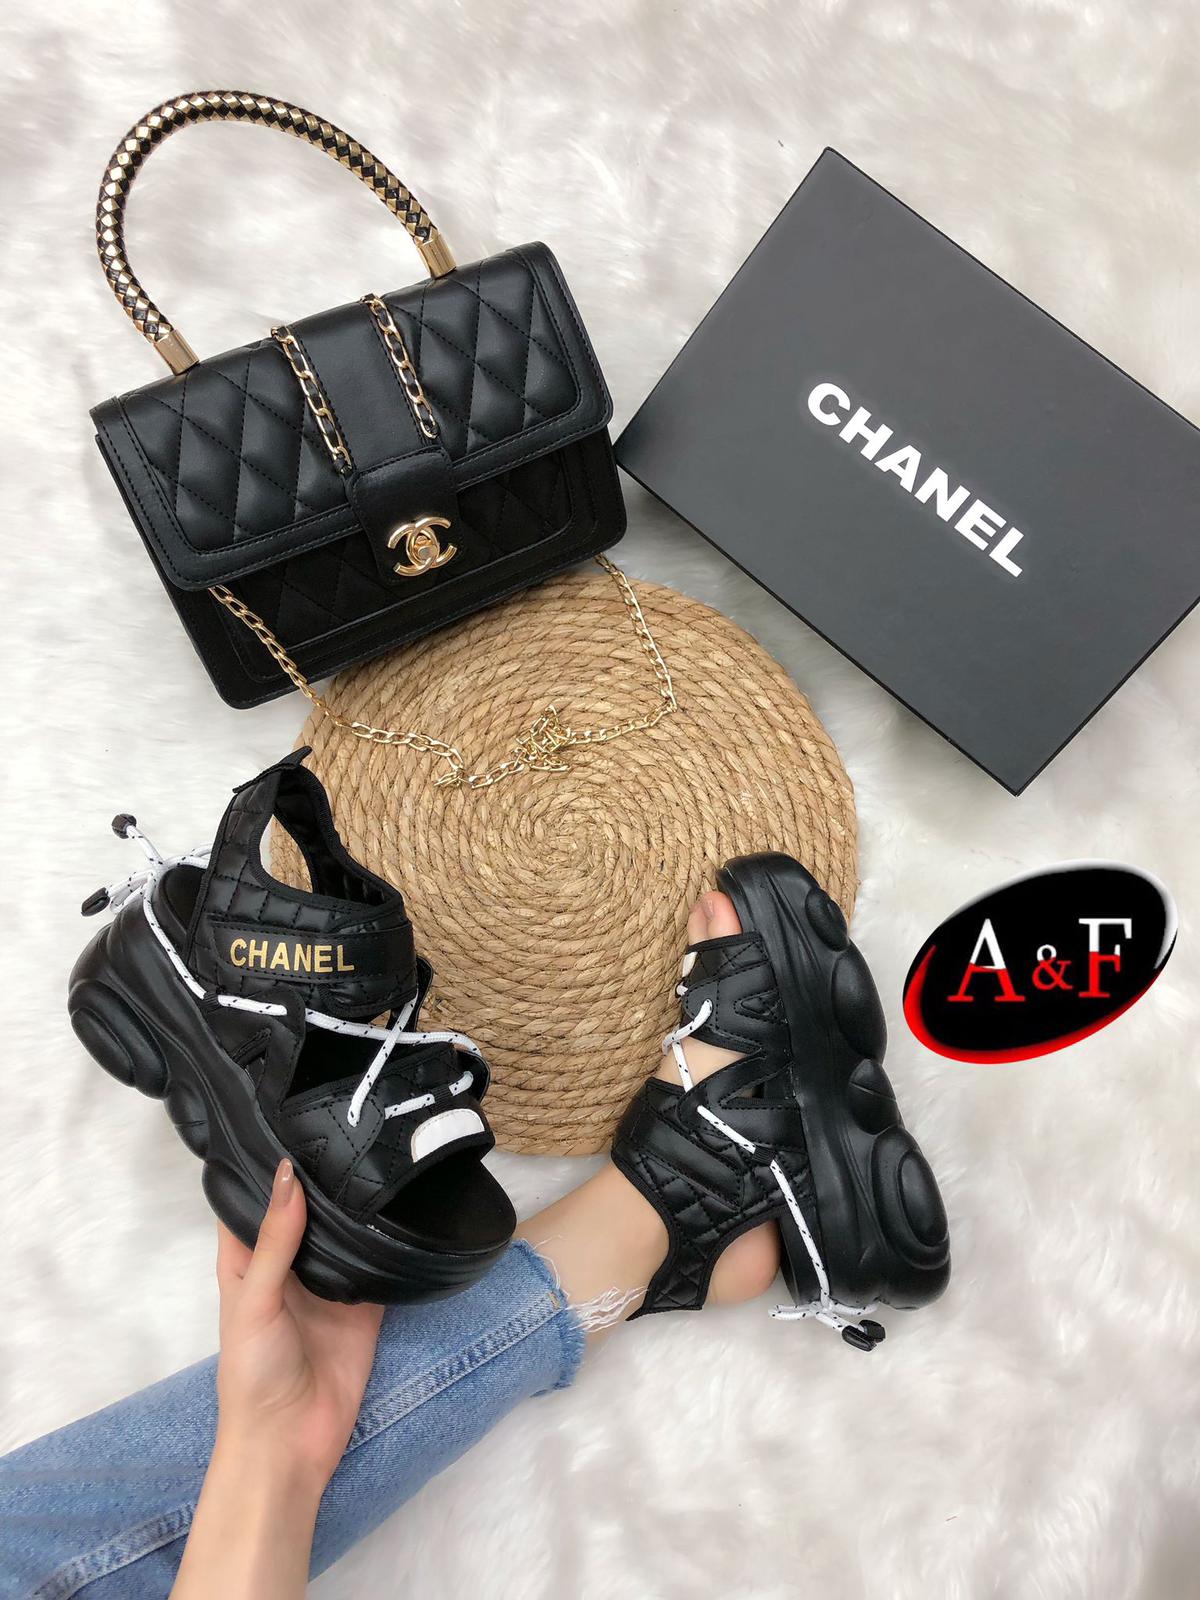 Chanel Bag and Sandals Set AFS